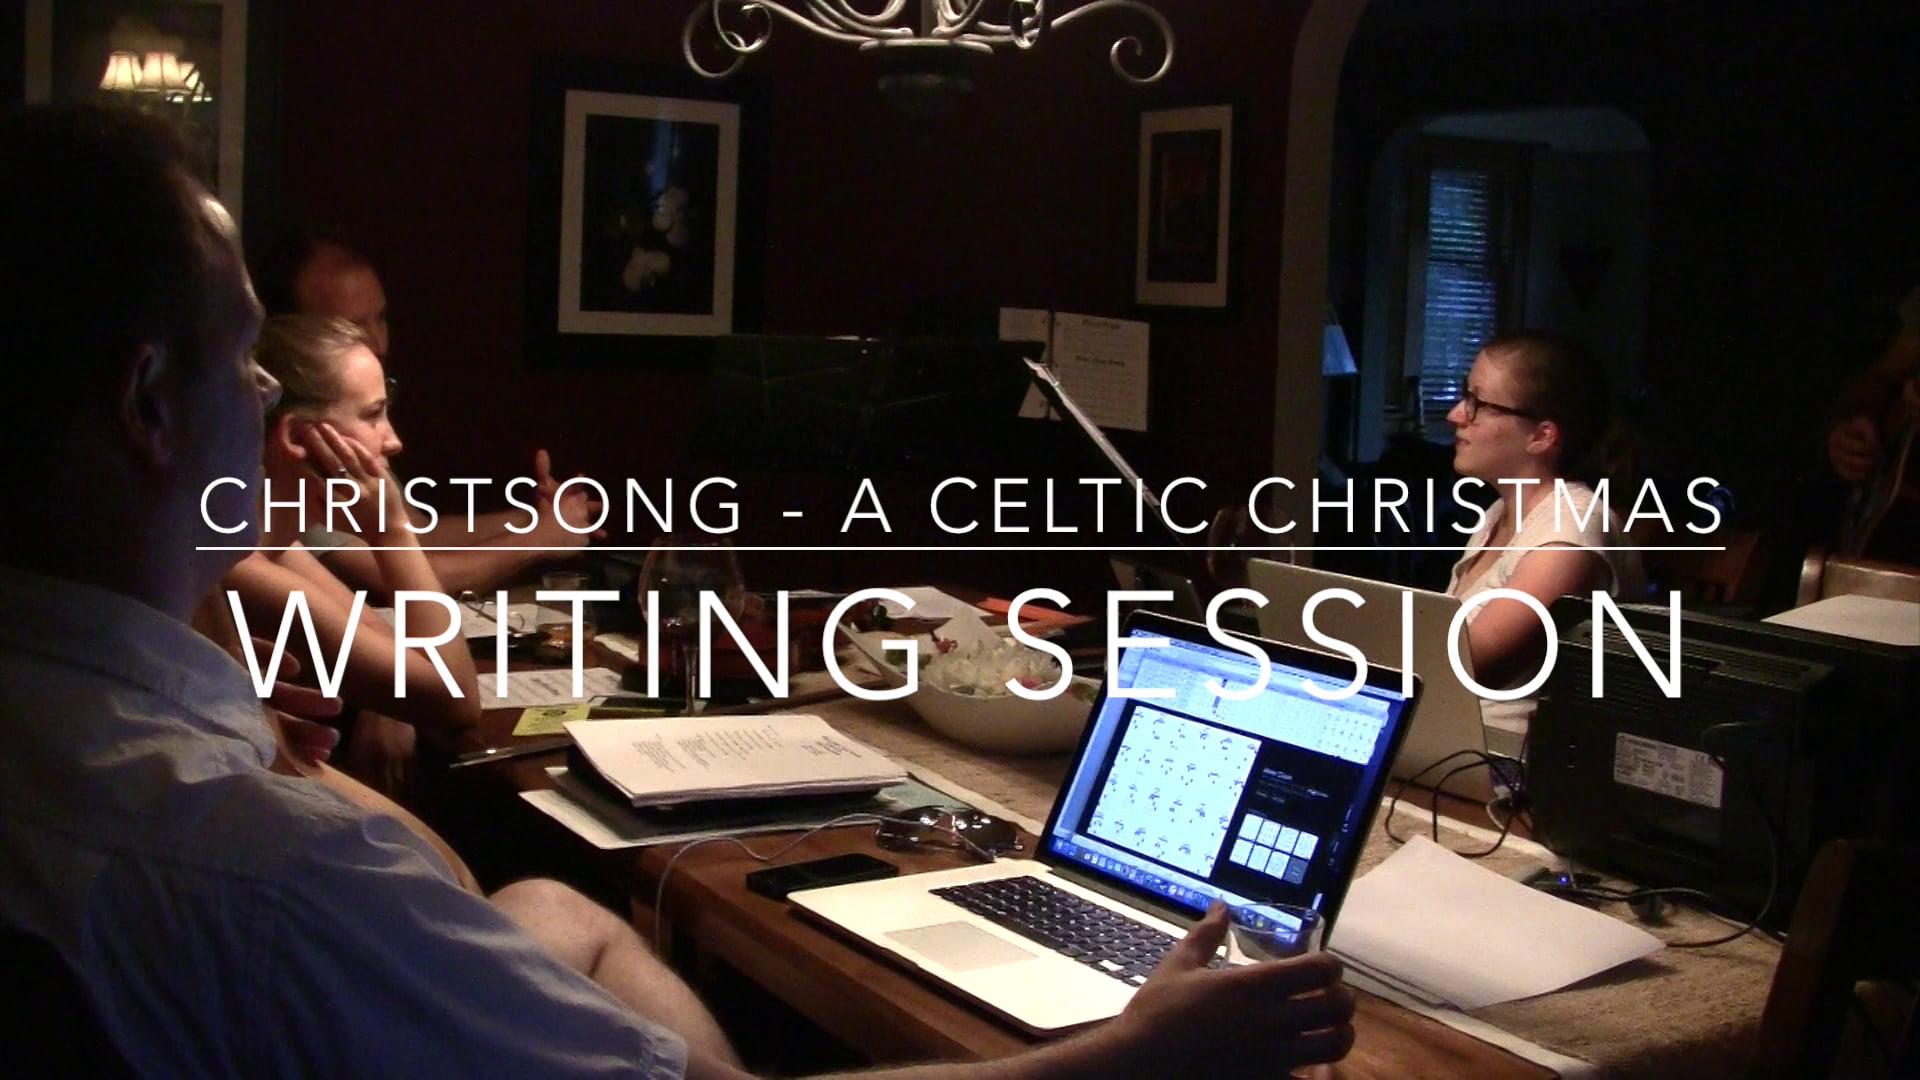 The Lutheran Ceili Orchestra - Silent Night - Writing Session